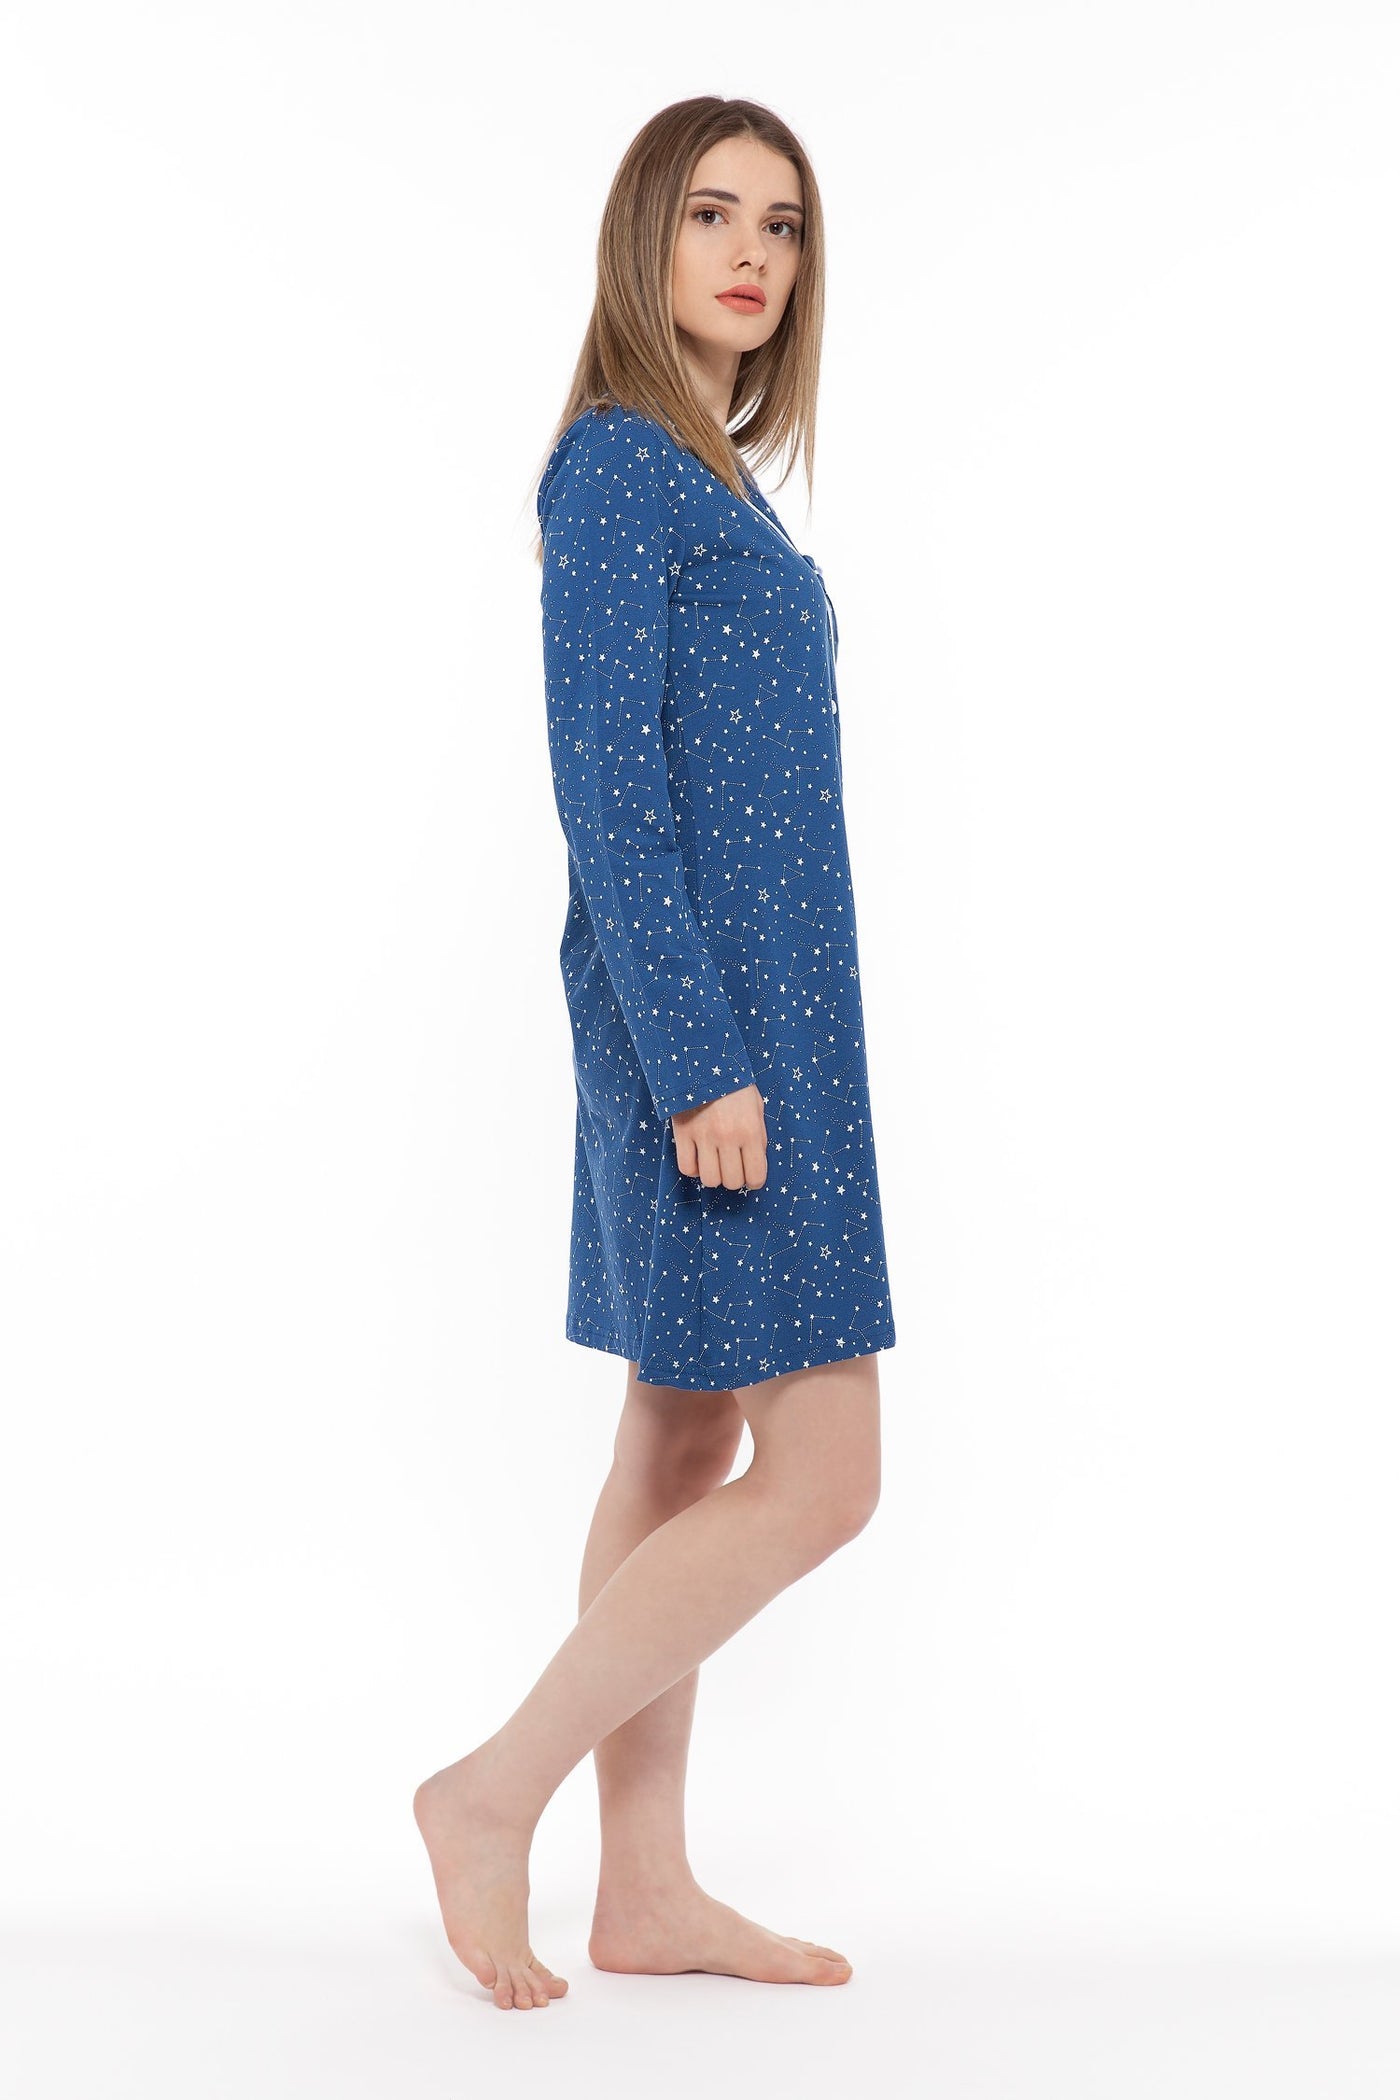 chassca nightdress with galaxy print - Breakmood